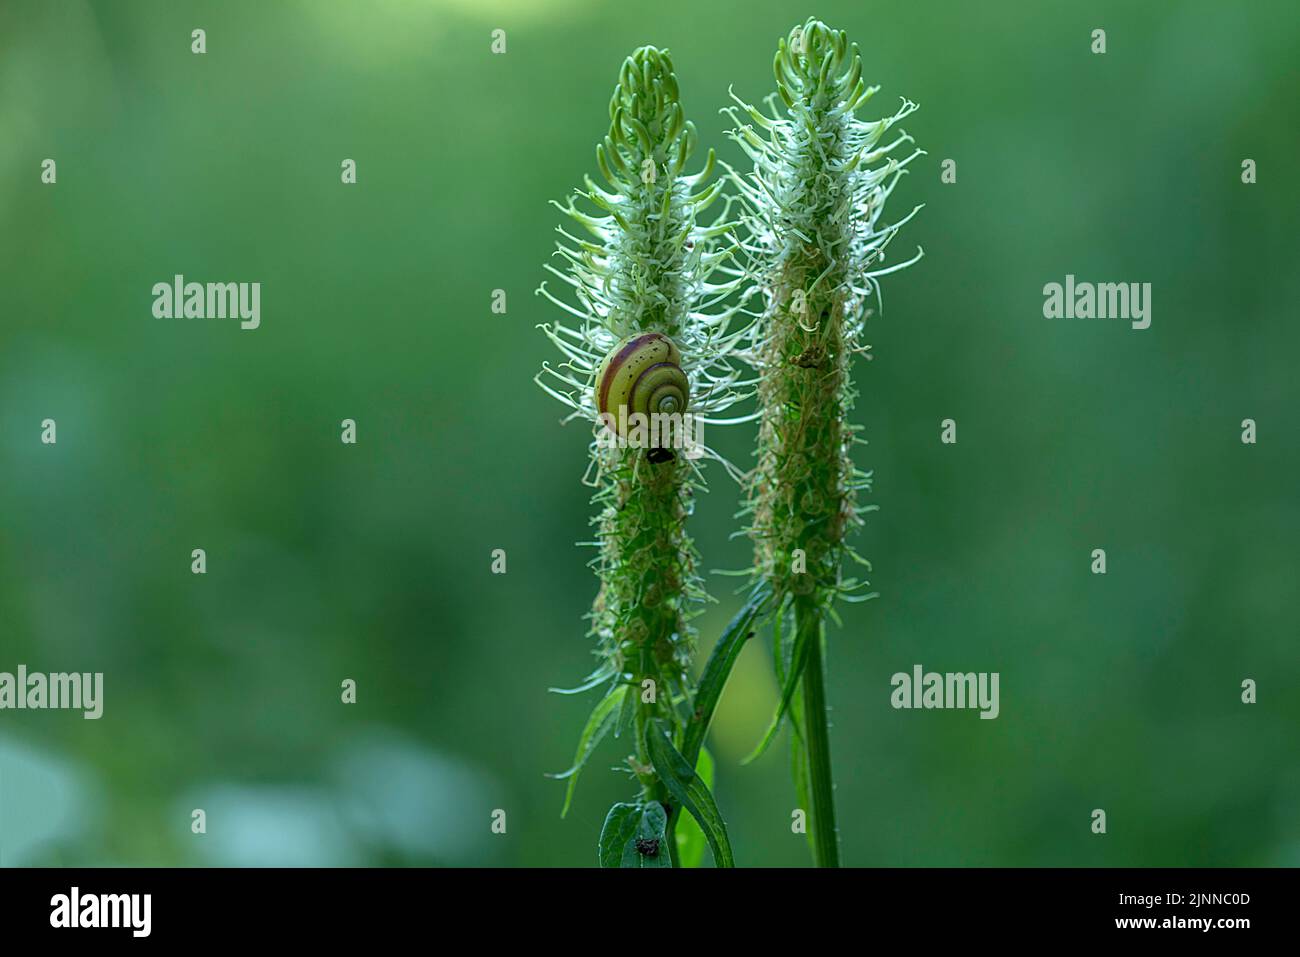 Snail on a withered spike of spiked rampion (Phyteuma spicatum), Bavaria, Germany Stock Photo